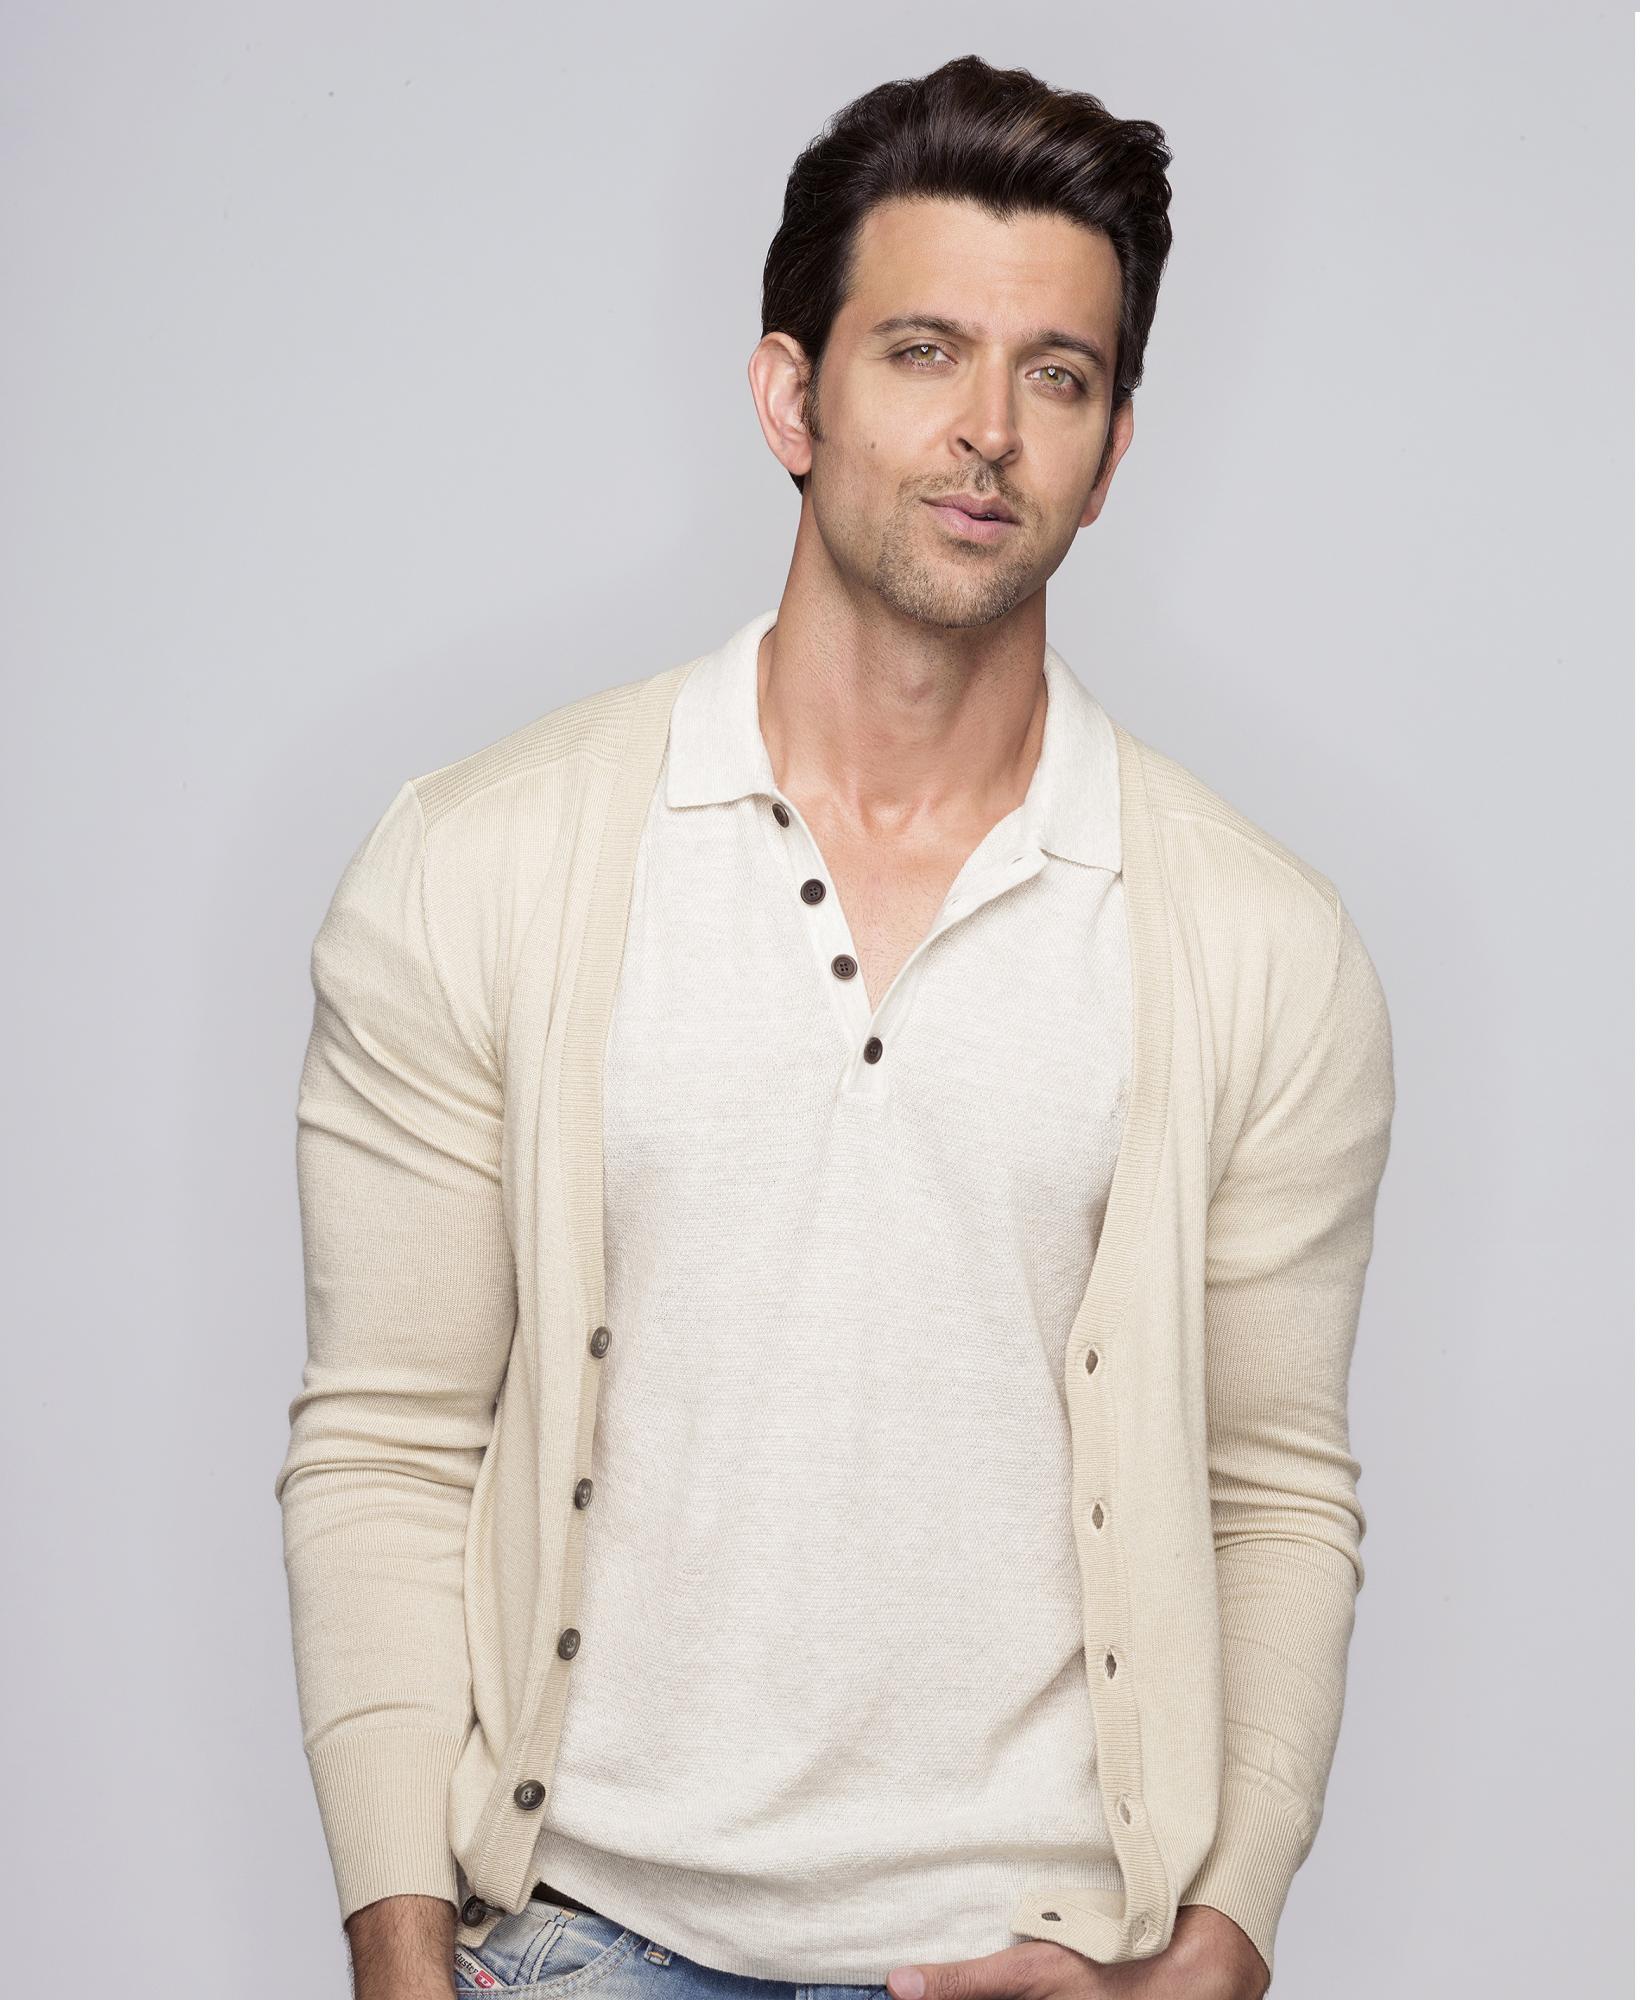 Hrithik Roshan Outfits-30 Best Dressing Styles of Hrithik Roshan | Hrithik  roshan, Outfits, Fashion